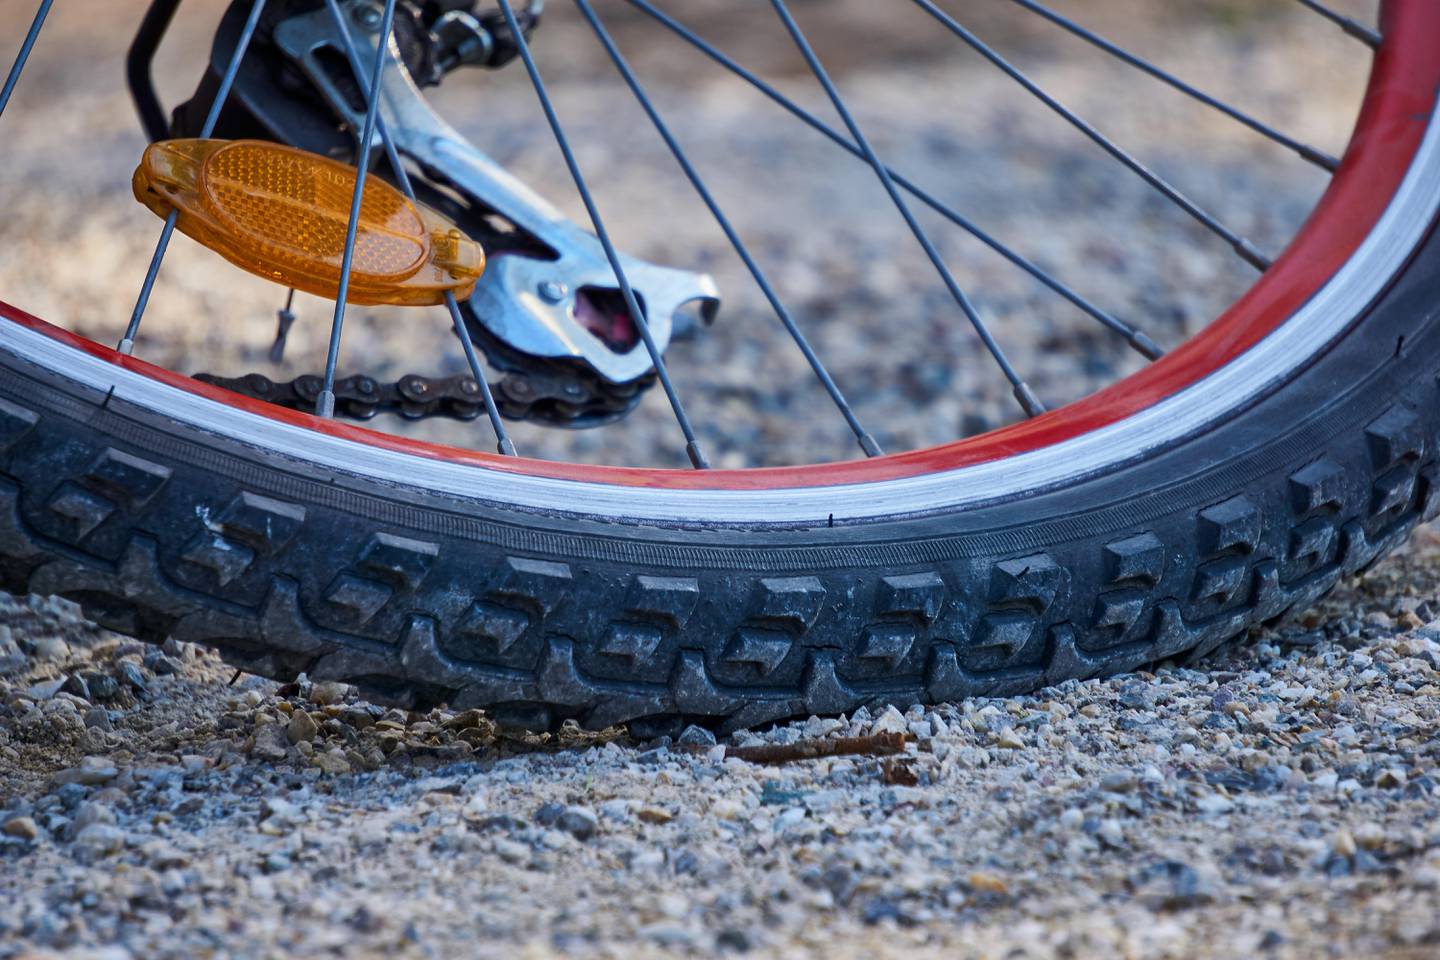 The deeper tread on a gravel bike's tires gives them better grip on grit and steep terrain.  Photo: Markus Distelrath / Pixabay